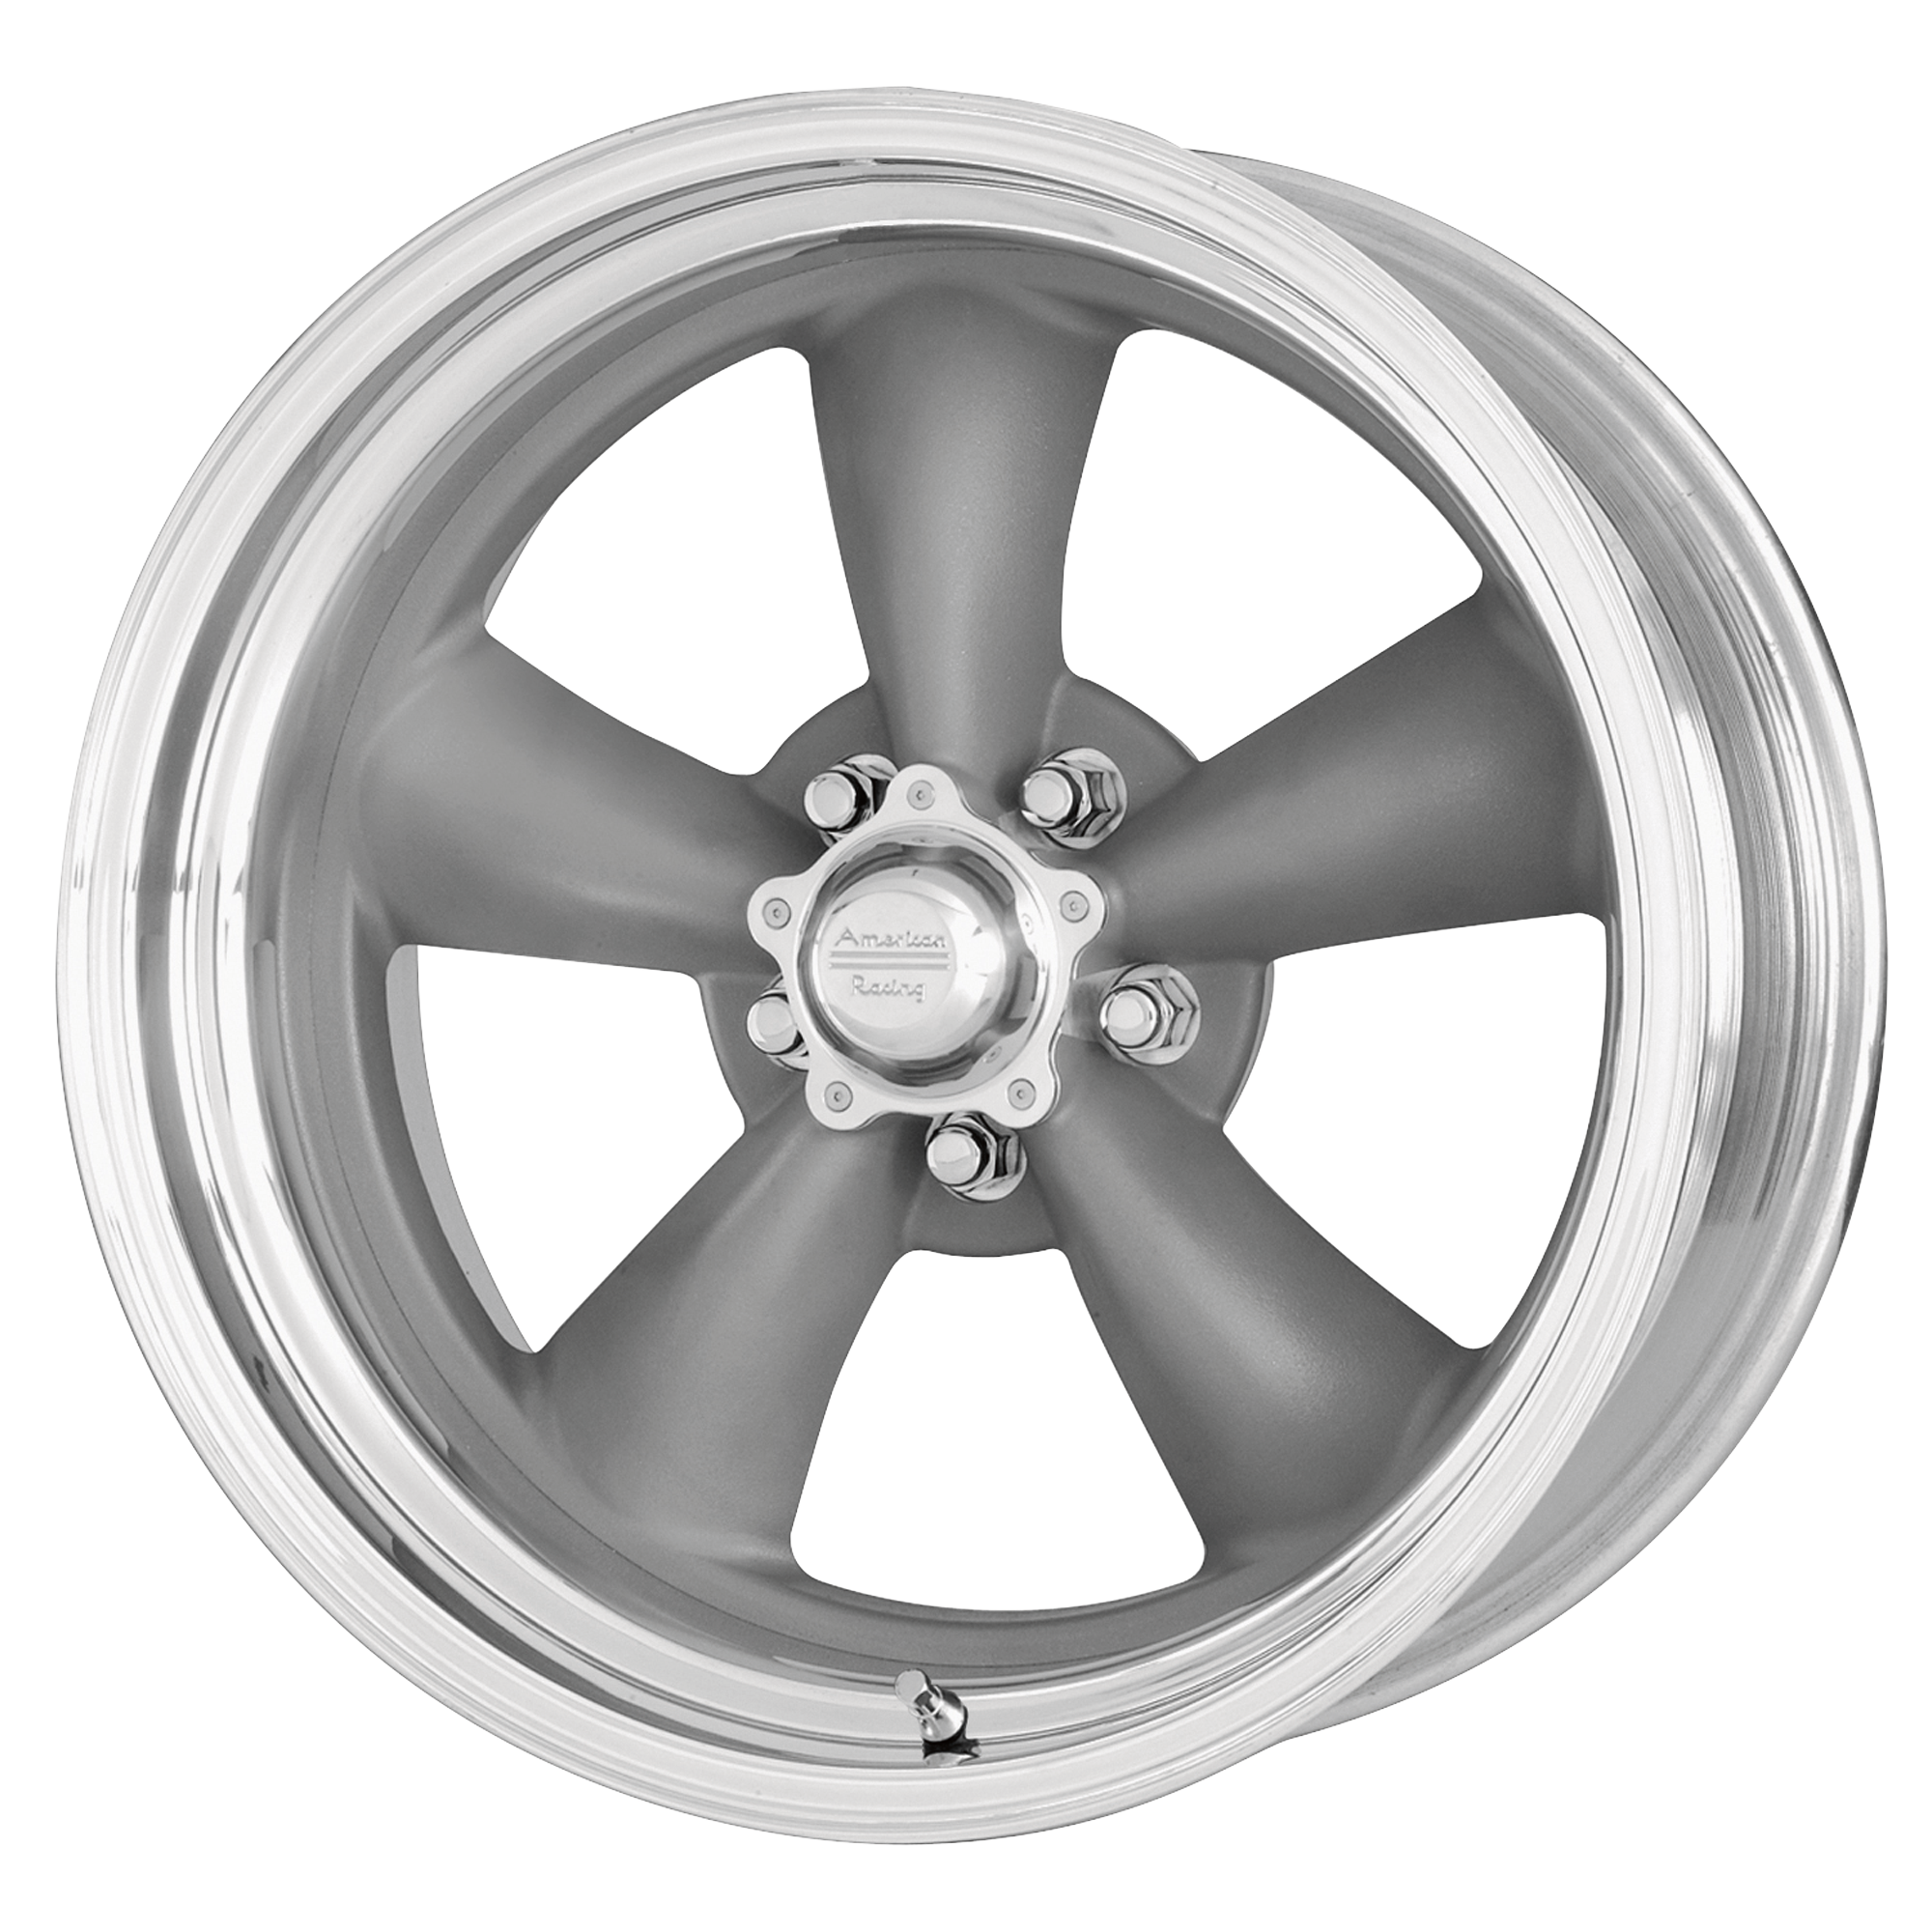 CLASSIC TORQ THRUST II ONE PIECE 15x8 5x114.30 MAG GRAY W/ MACHINED LIP (0 mm) - Tires and Engine Performance